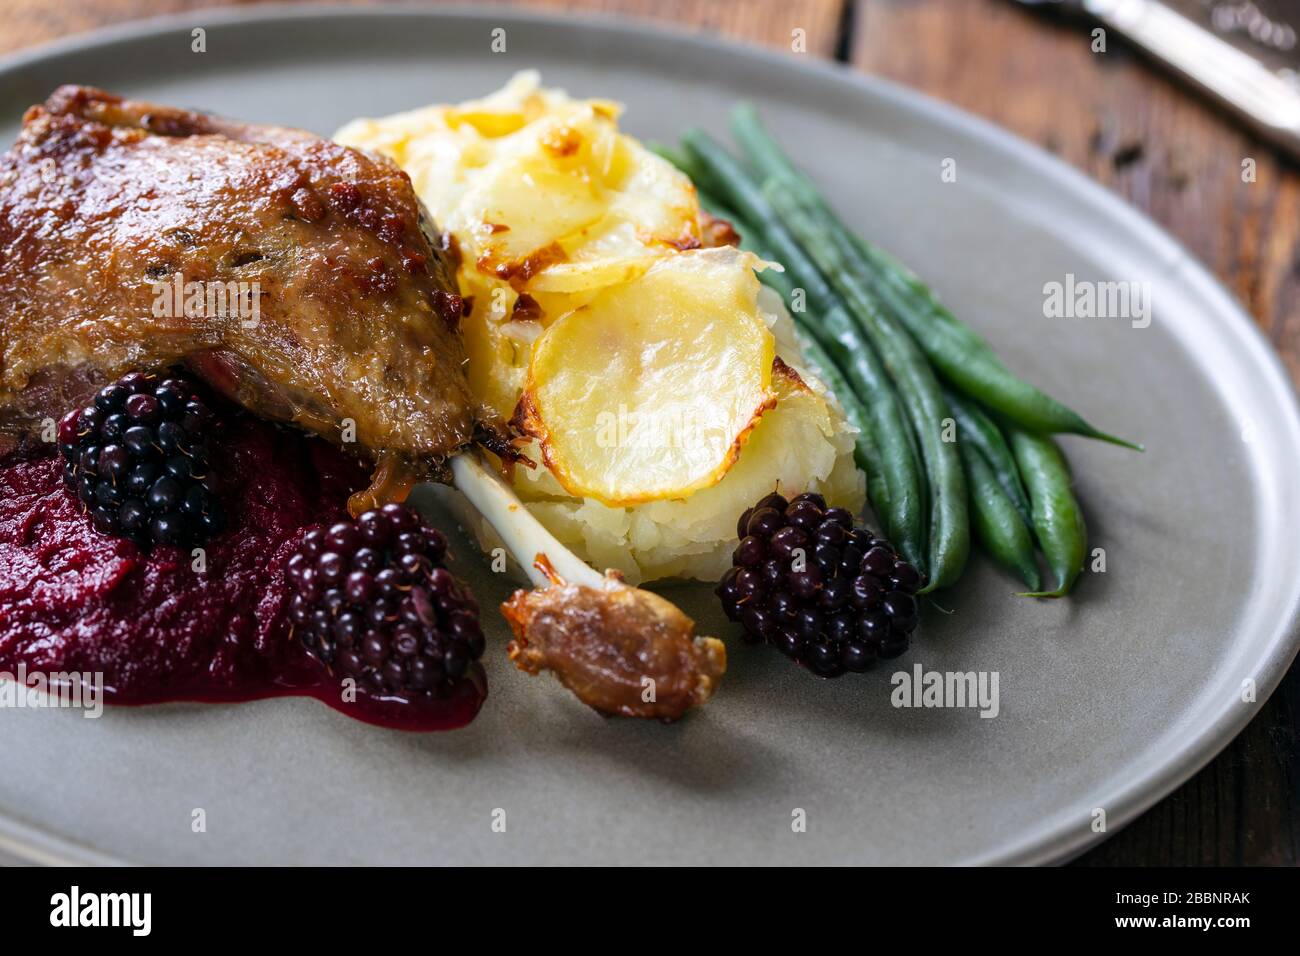 Roast duck leg with beetroot and blackberry puree and dauphinois potatoes Stock Photo